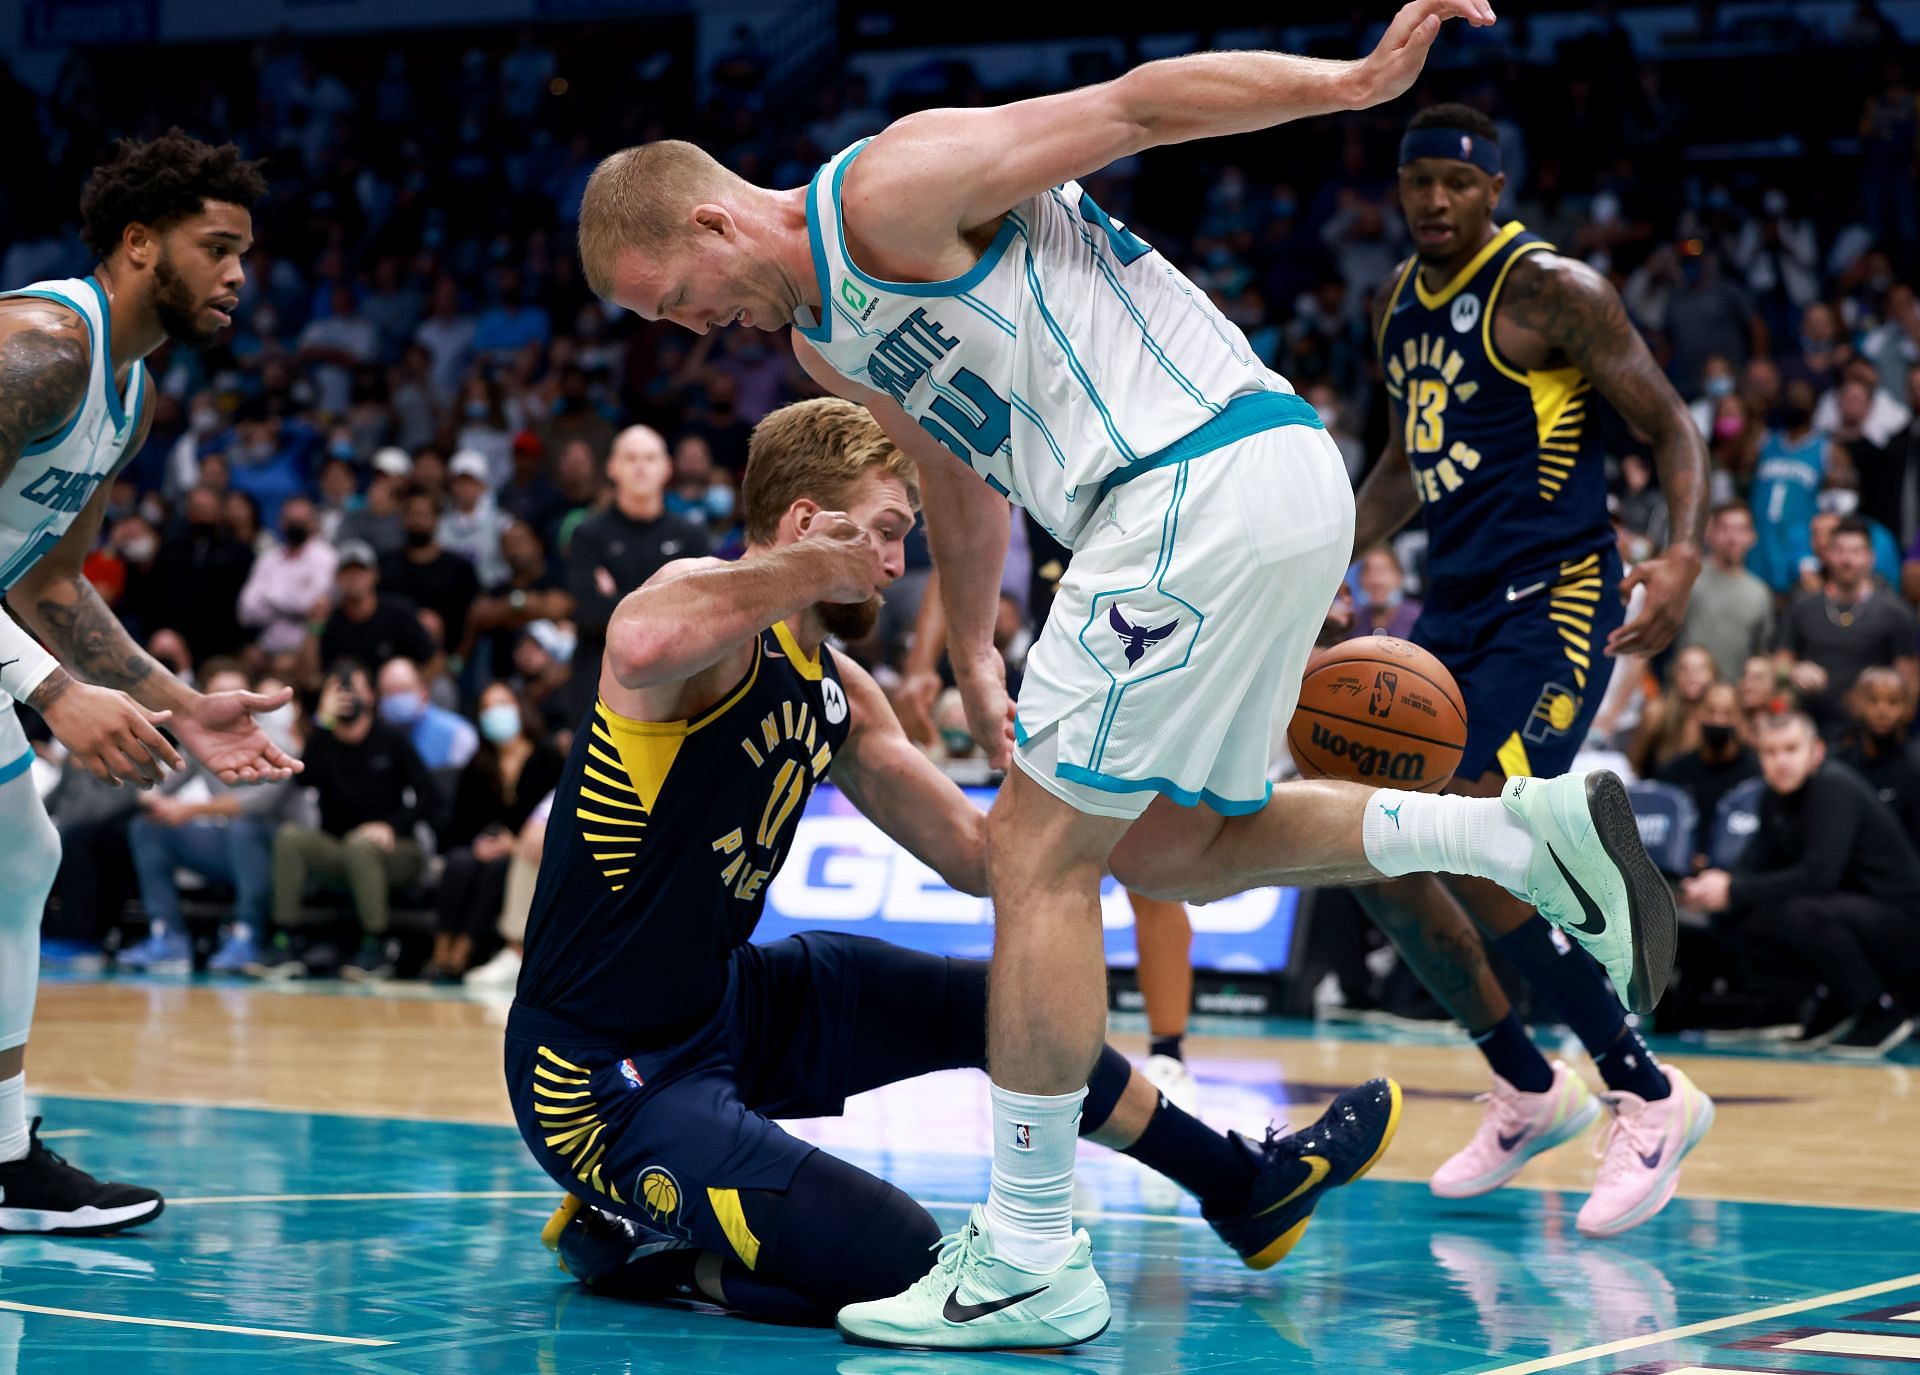 Domantas Sabonis of the Indiana Pacers grapples with Plumlee of the Charlotte Hornets